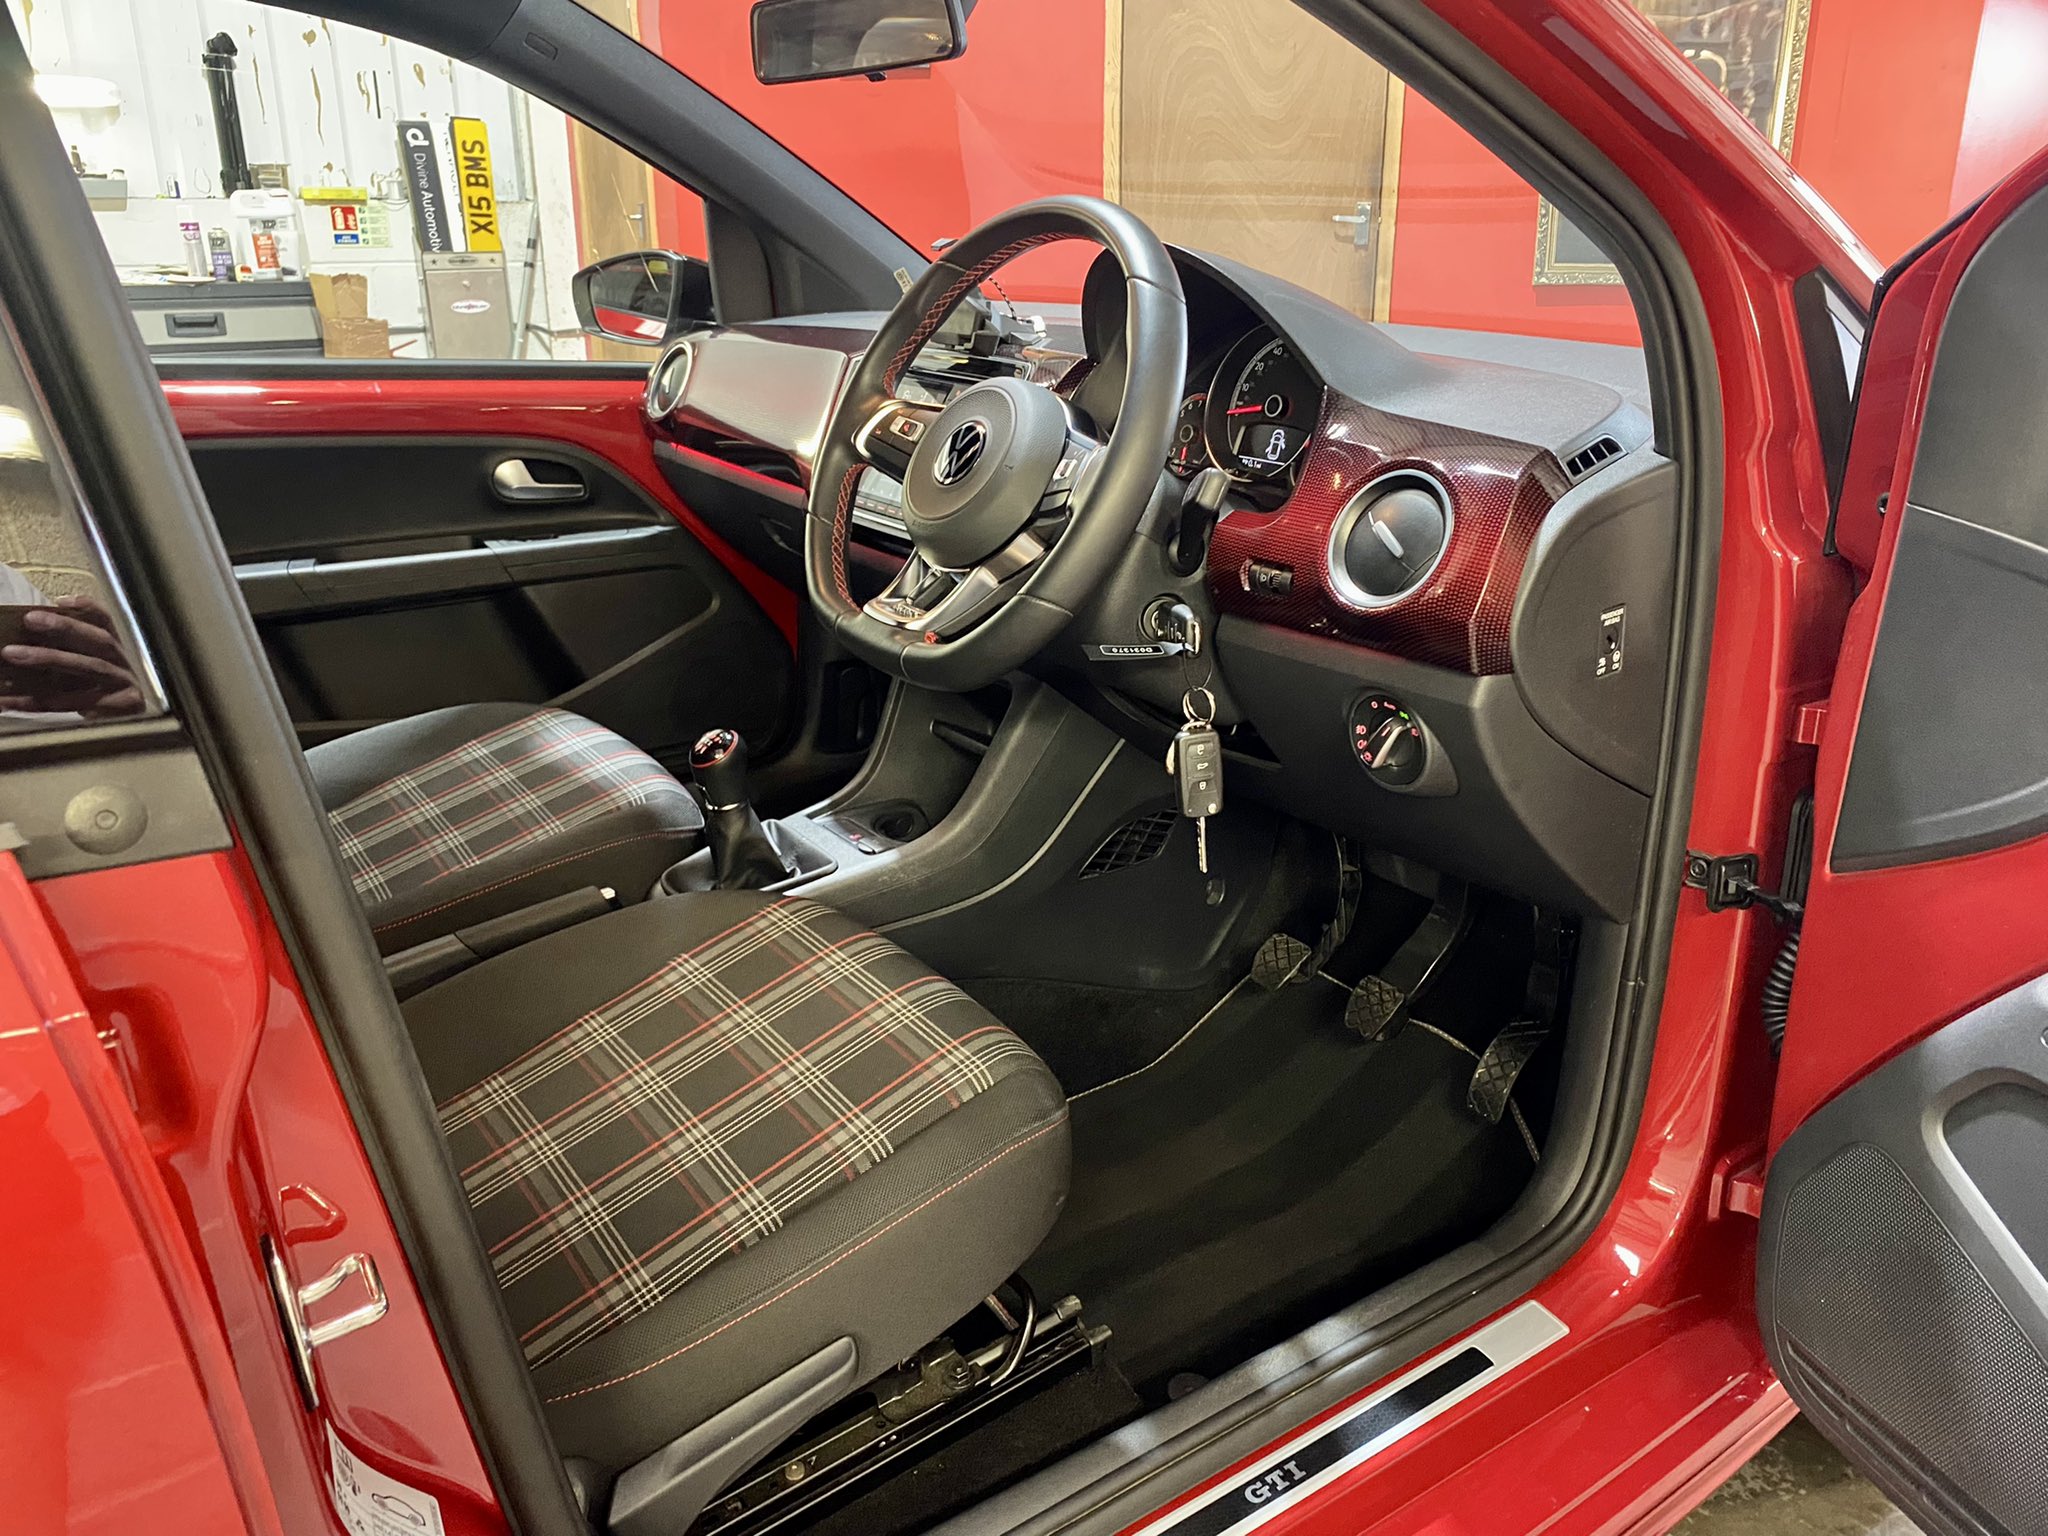 Tom Blackmore on Twitter: VW UP! GTI is in stock and ready to go 1 owner, 8,650 miles, Kings Red Metallic black painted roof, 5 door, Climate Control, Light &amp;